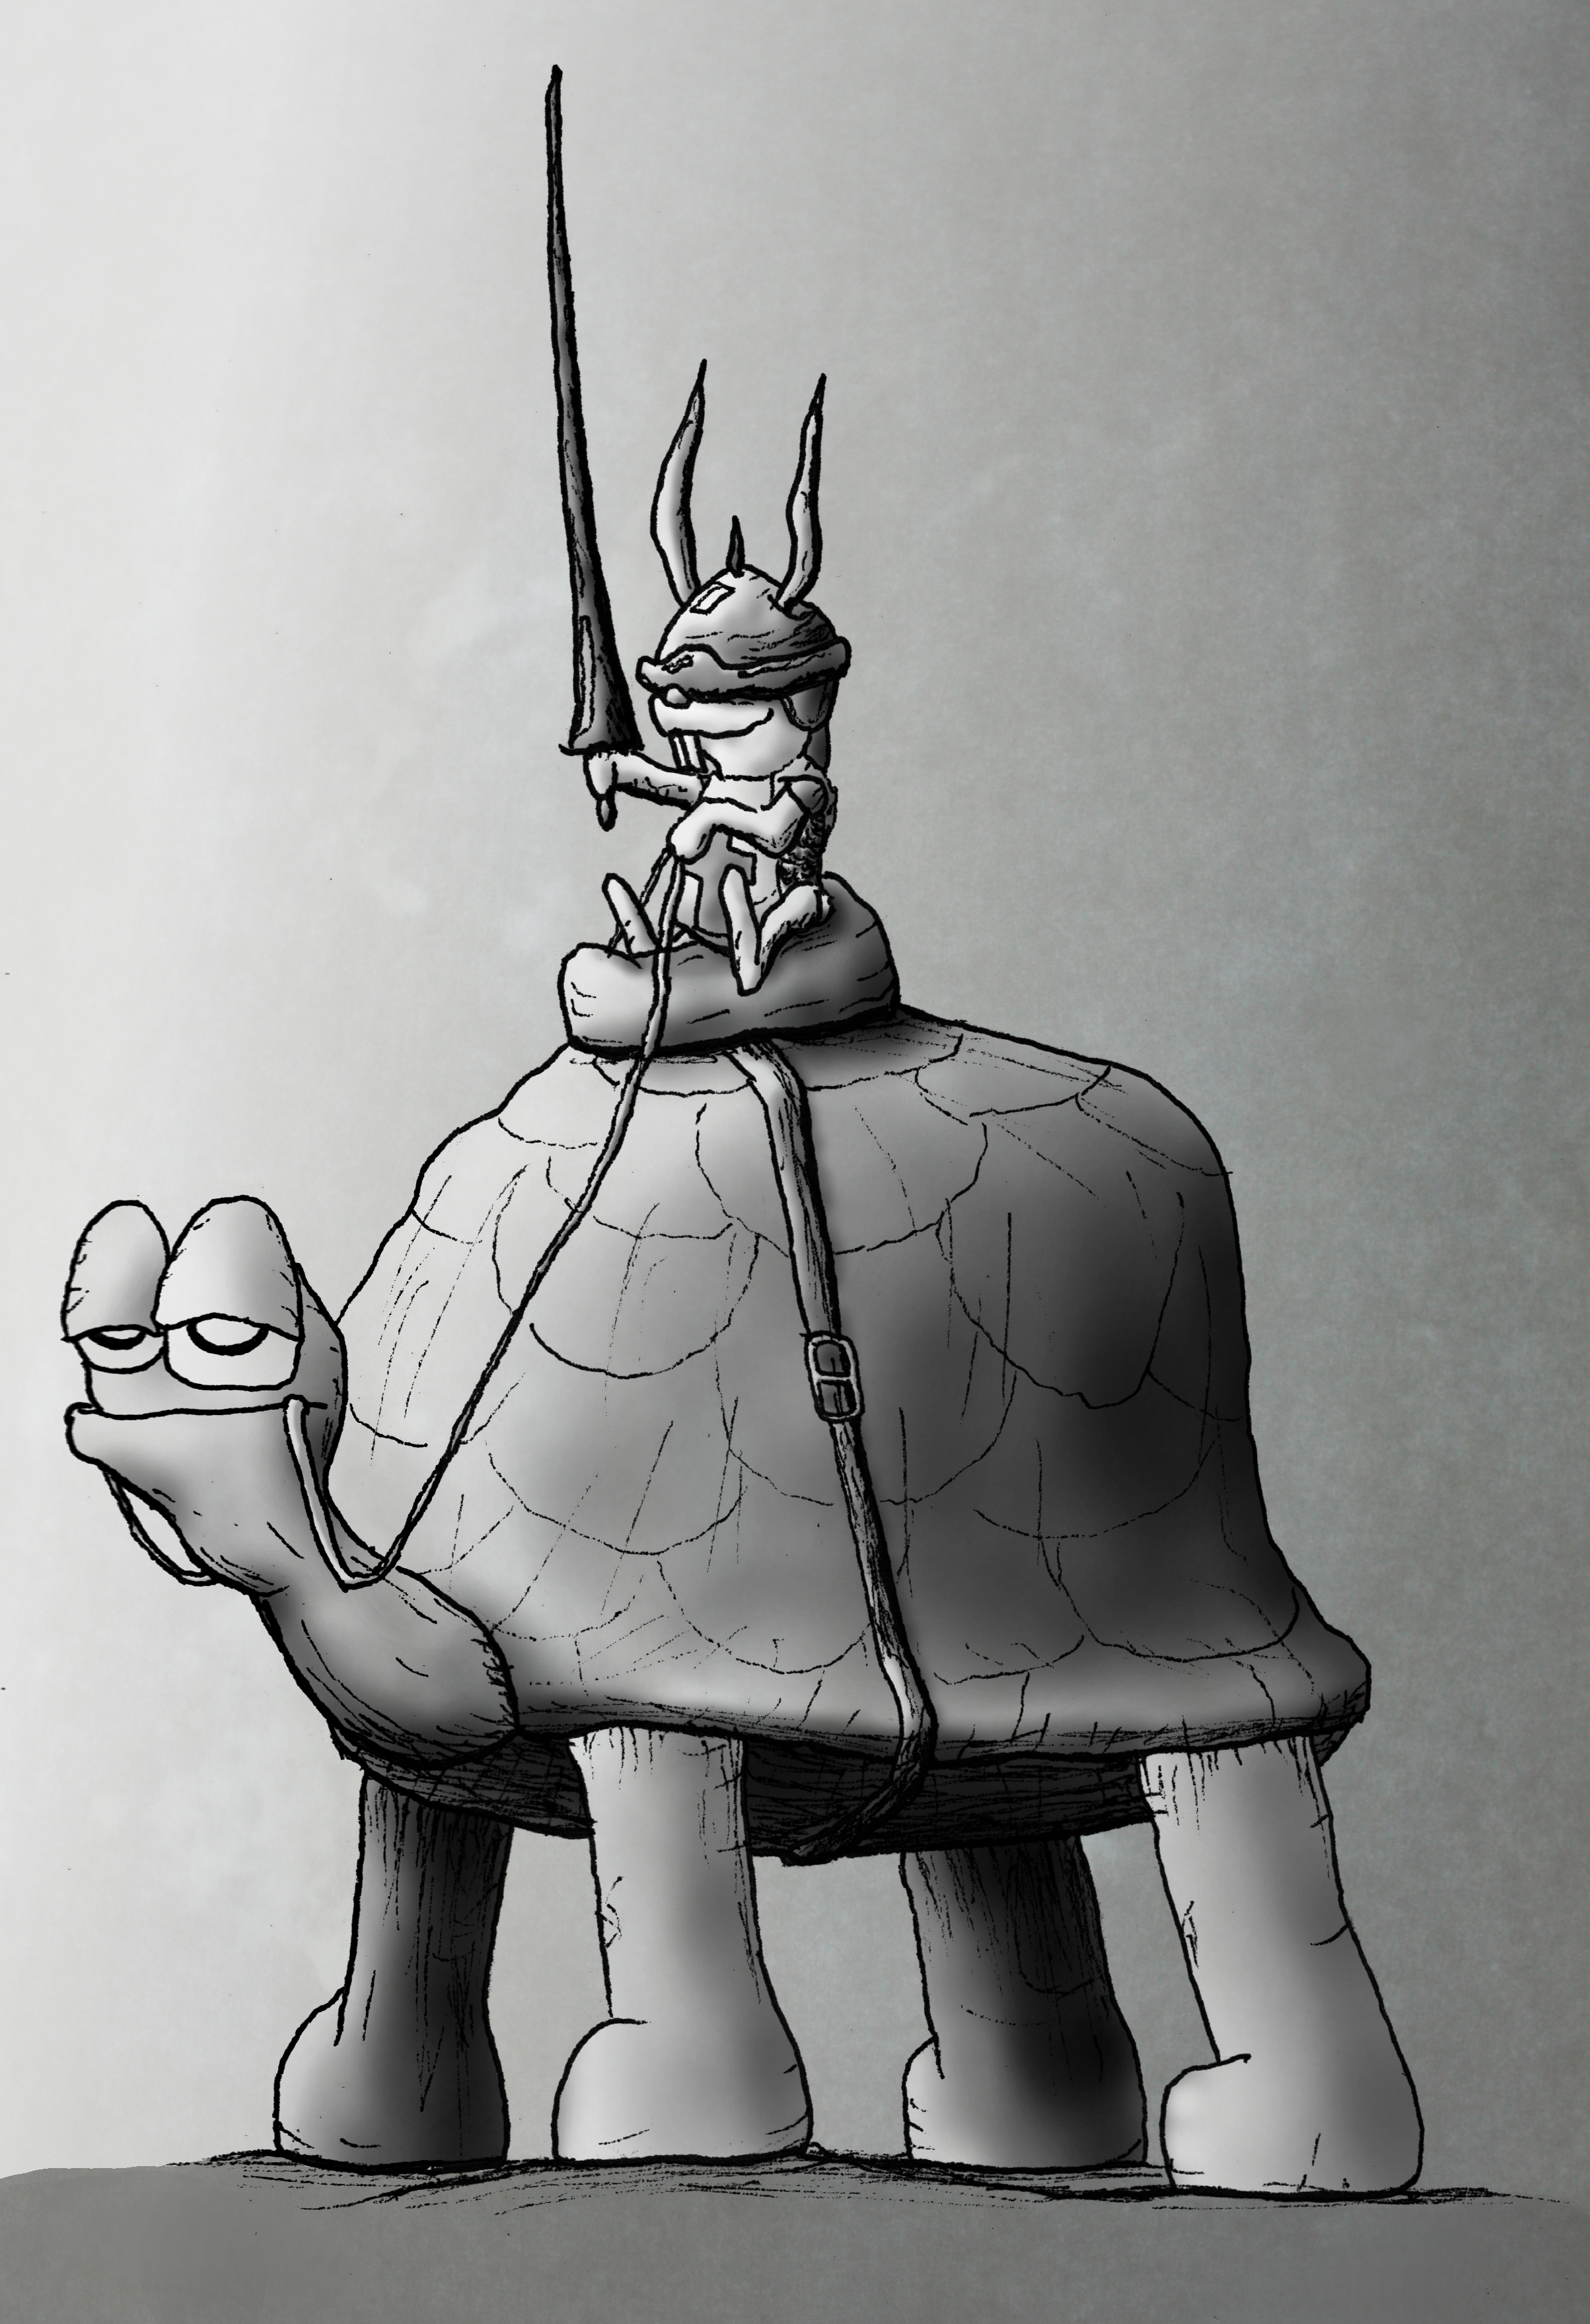 Tortoise and Hare.